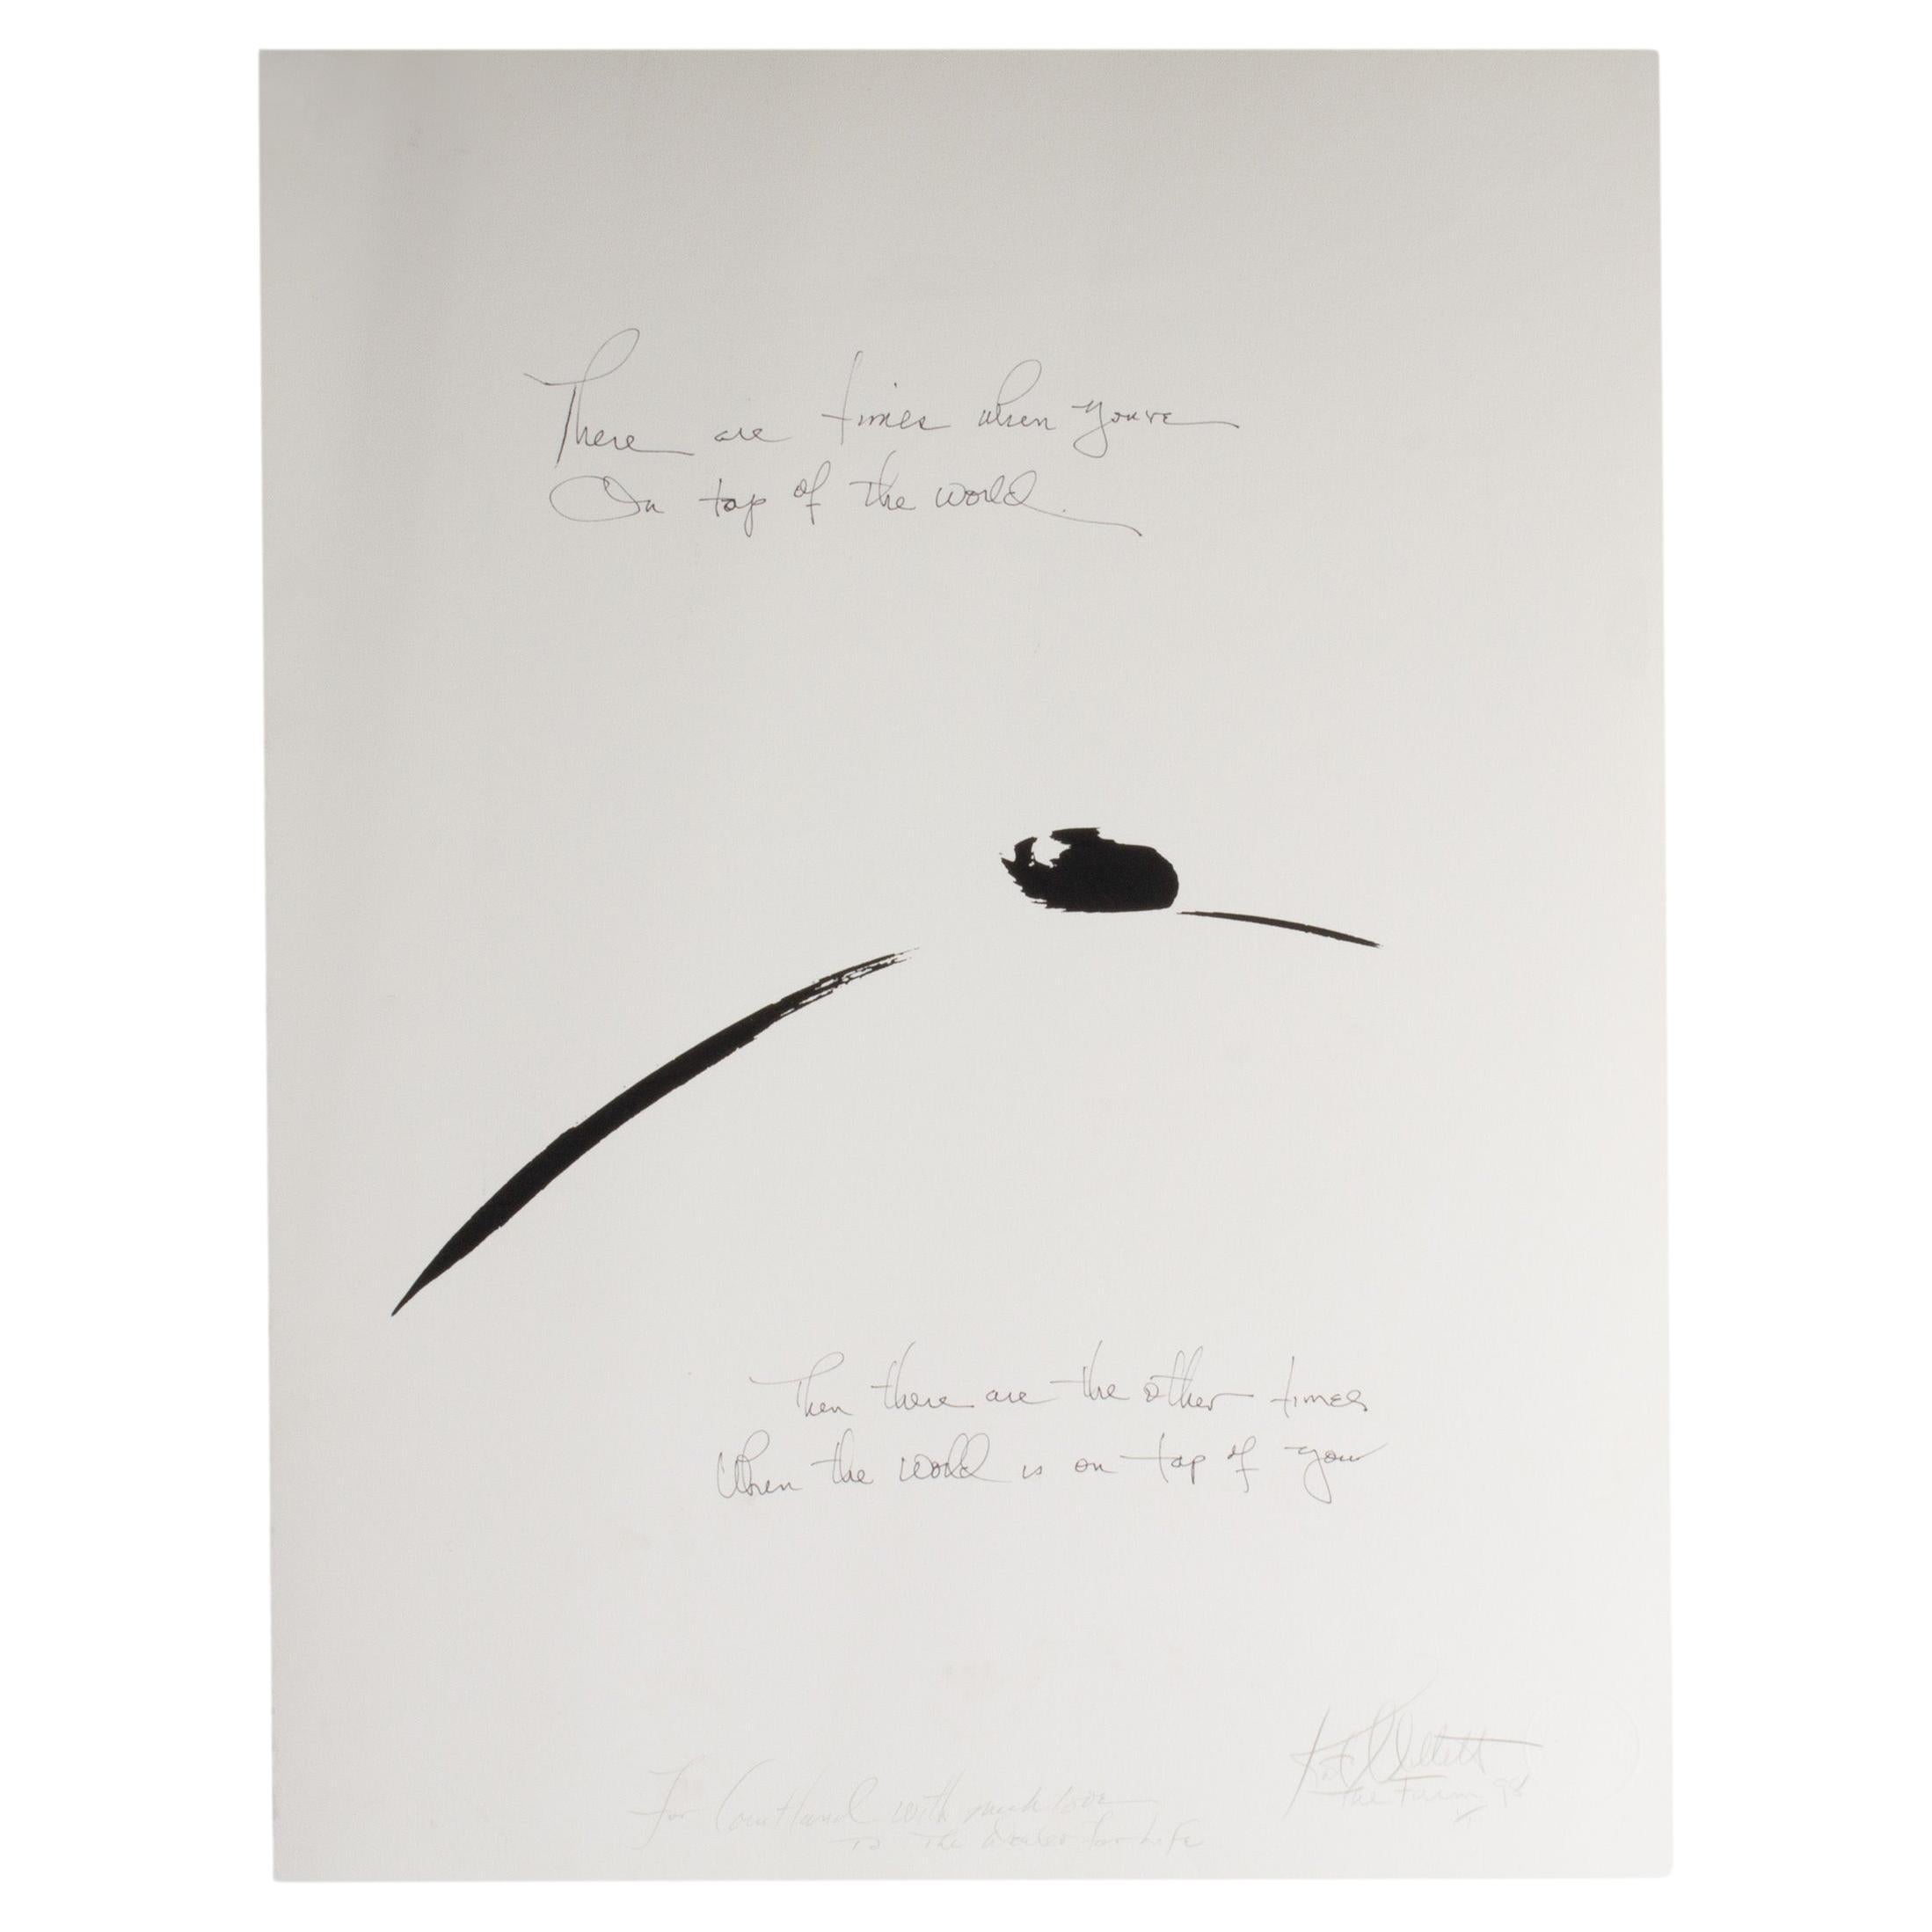 Kate Millett Signed 1998 “There Are Times” Abstract Lithograph For Sale